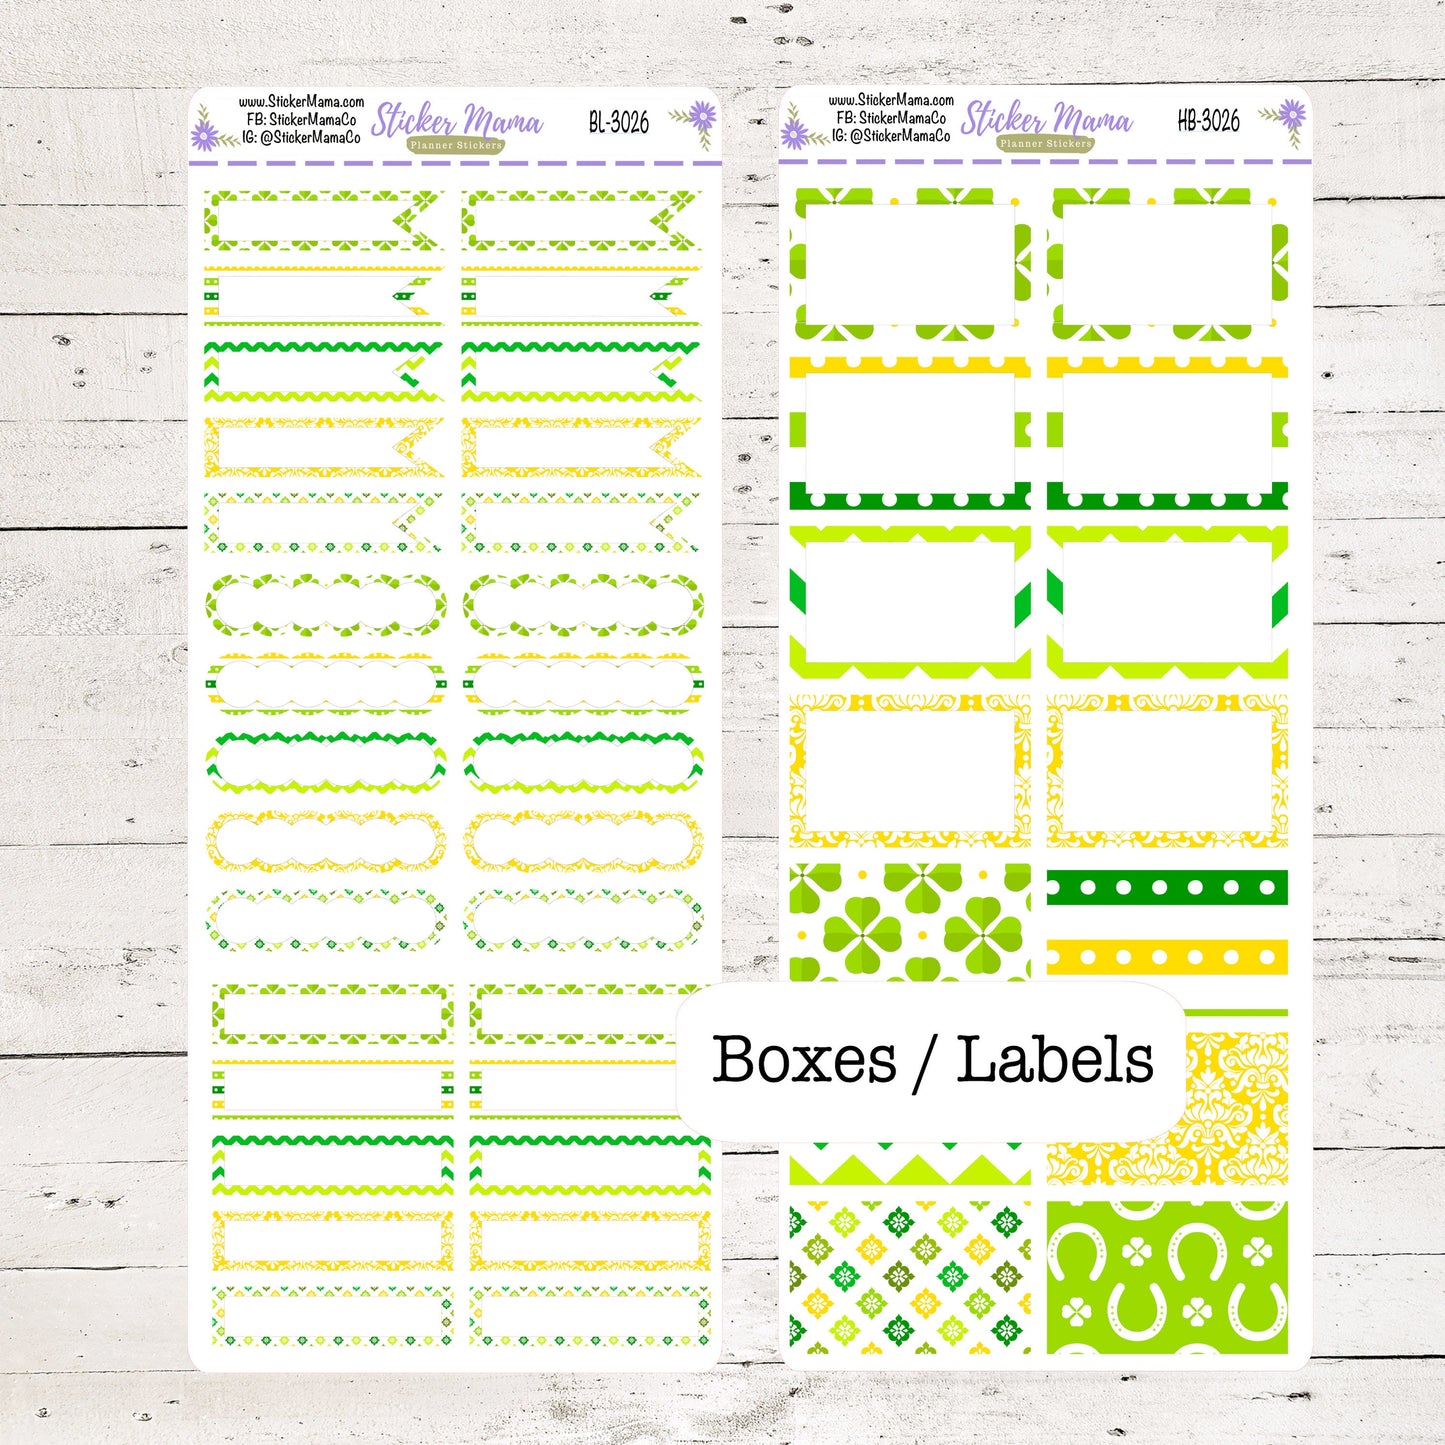 BL-3026 - HB-3026 St. Patricks Day Basic Label Stickers -  - Half Boxes - Planner Stickers - Full Box for Planners